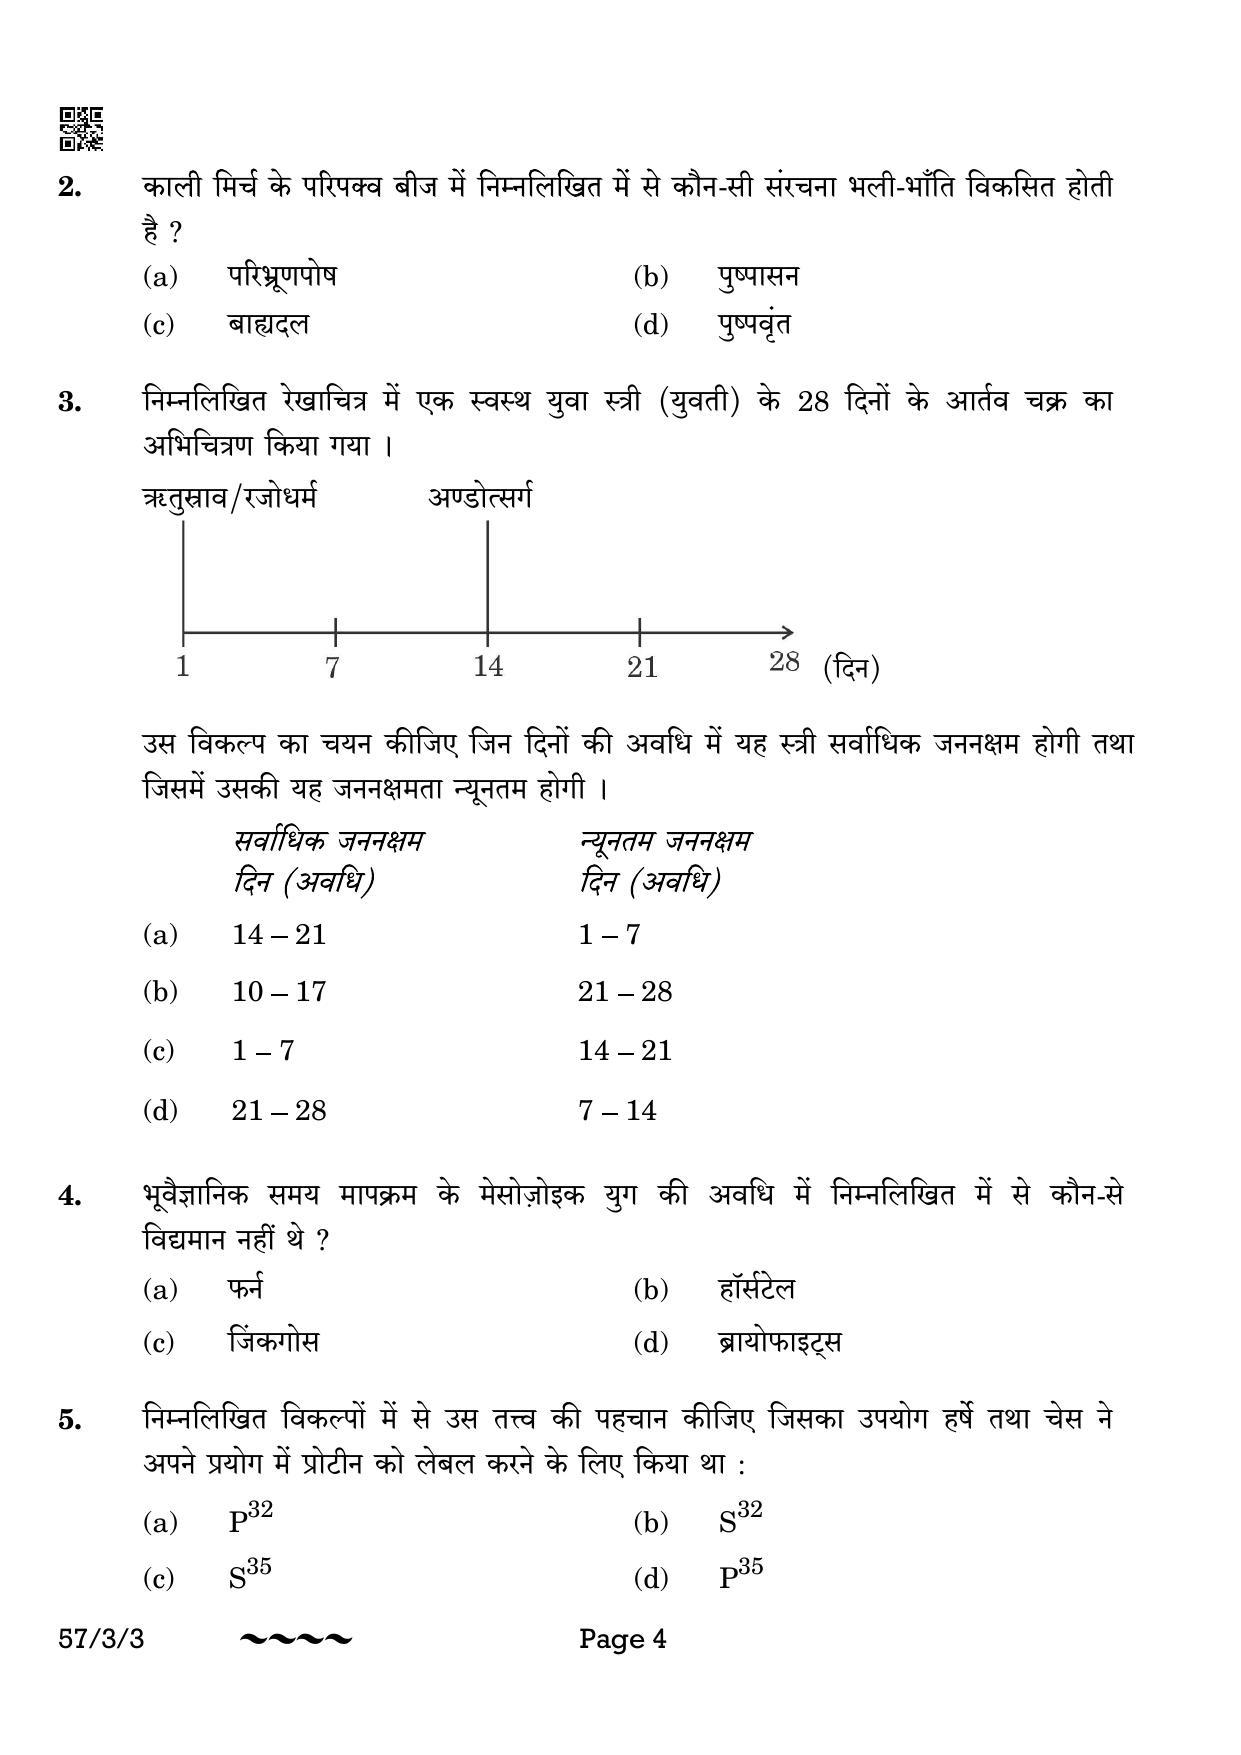 CBSE Class 12 57-3-3 Biology 2023 Question Paper - Page 4